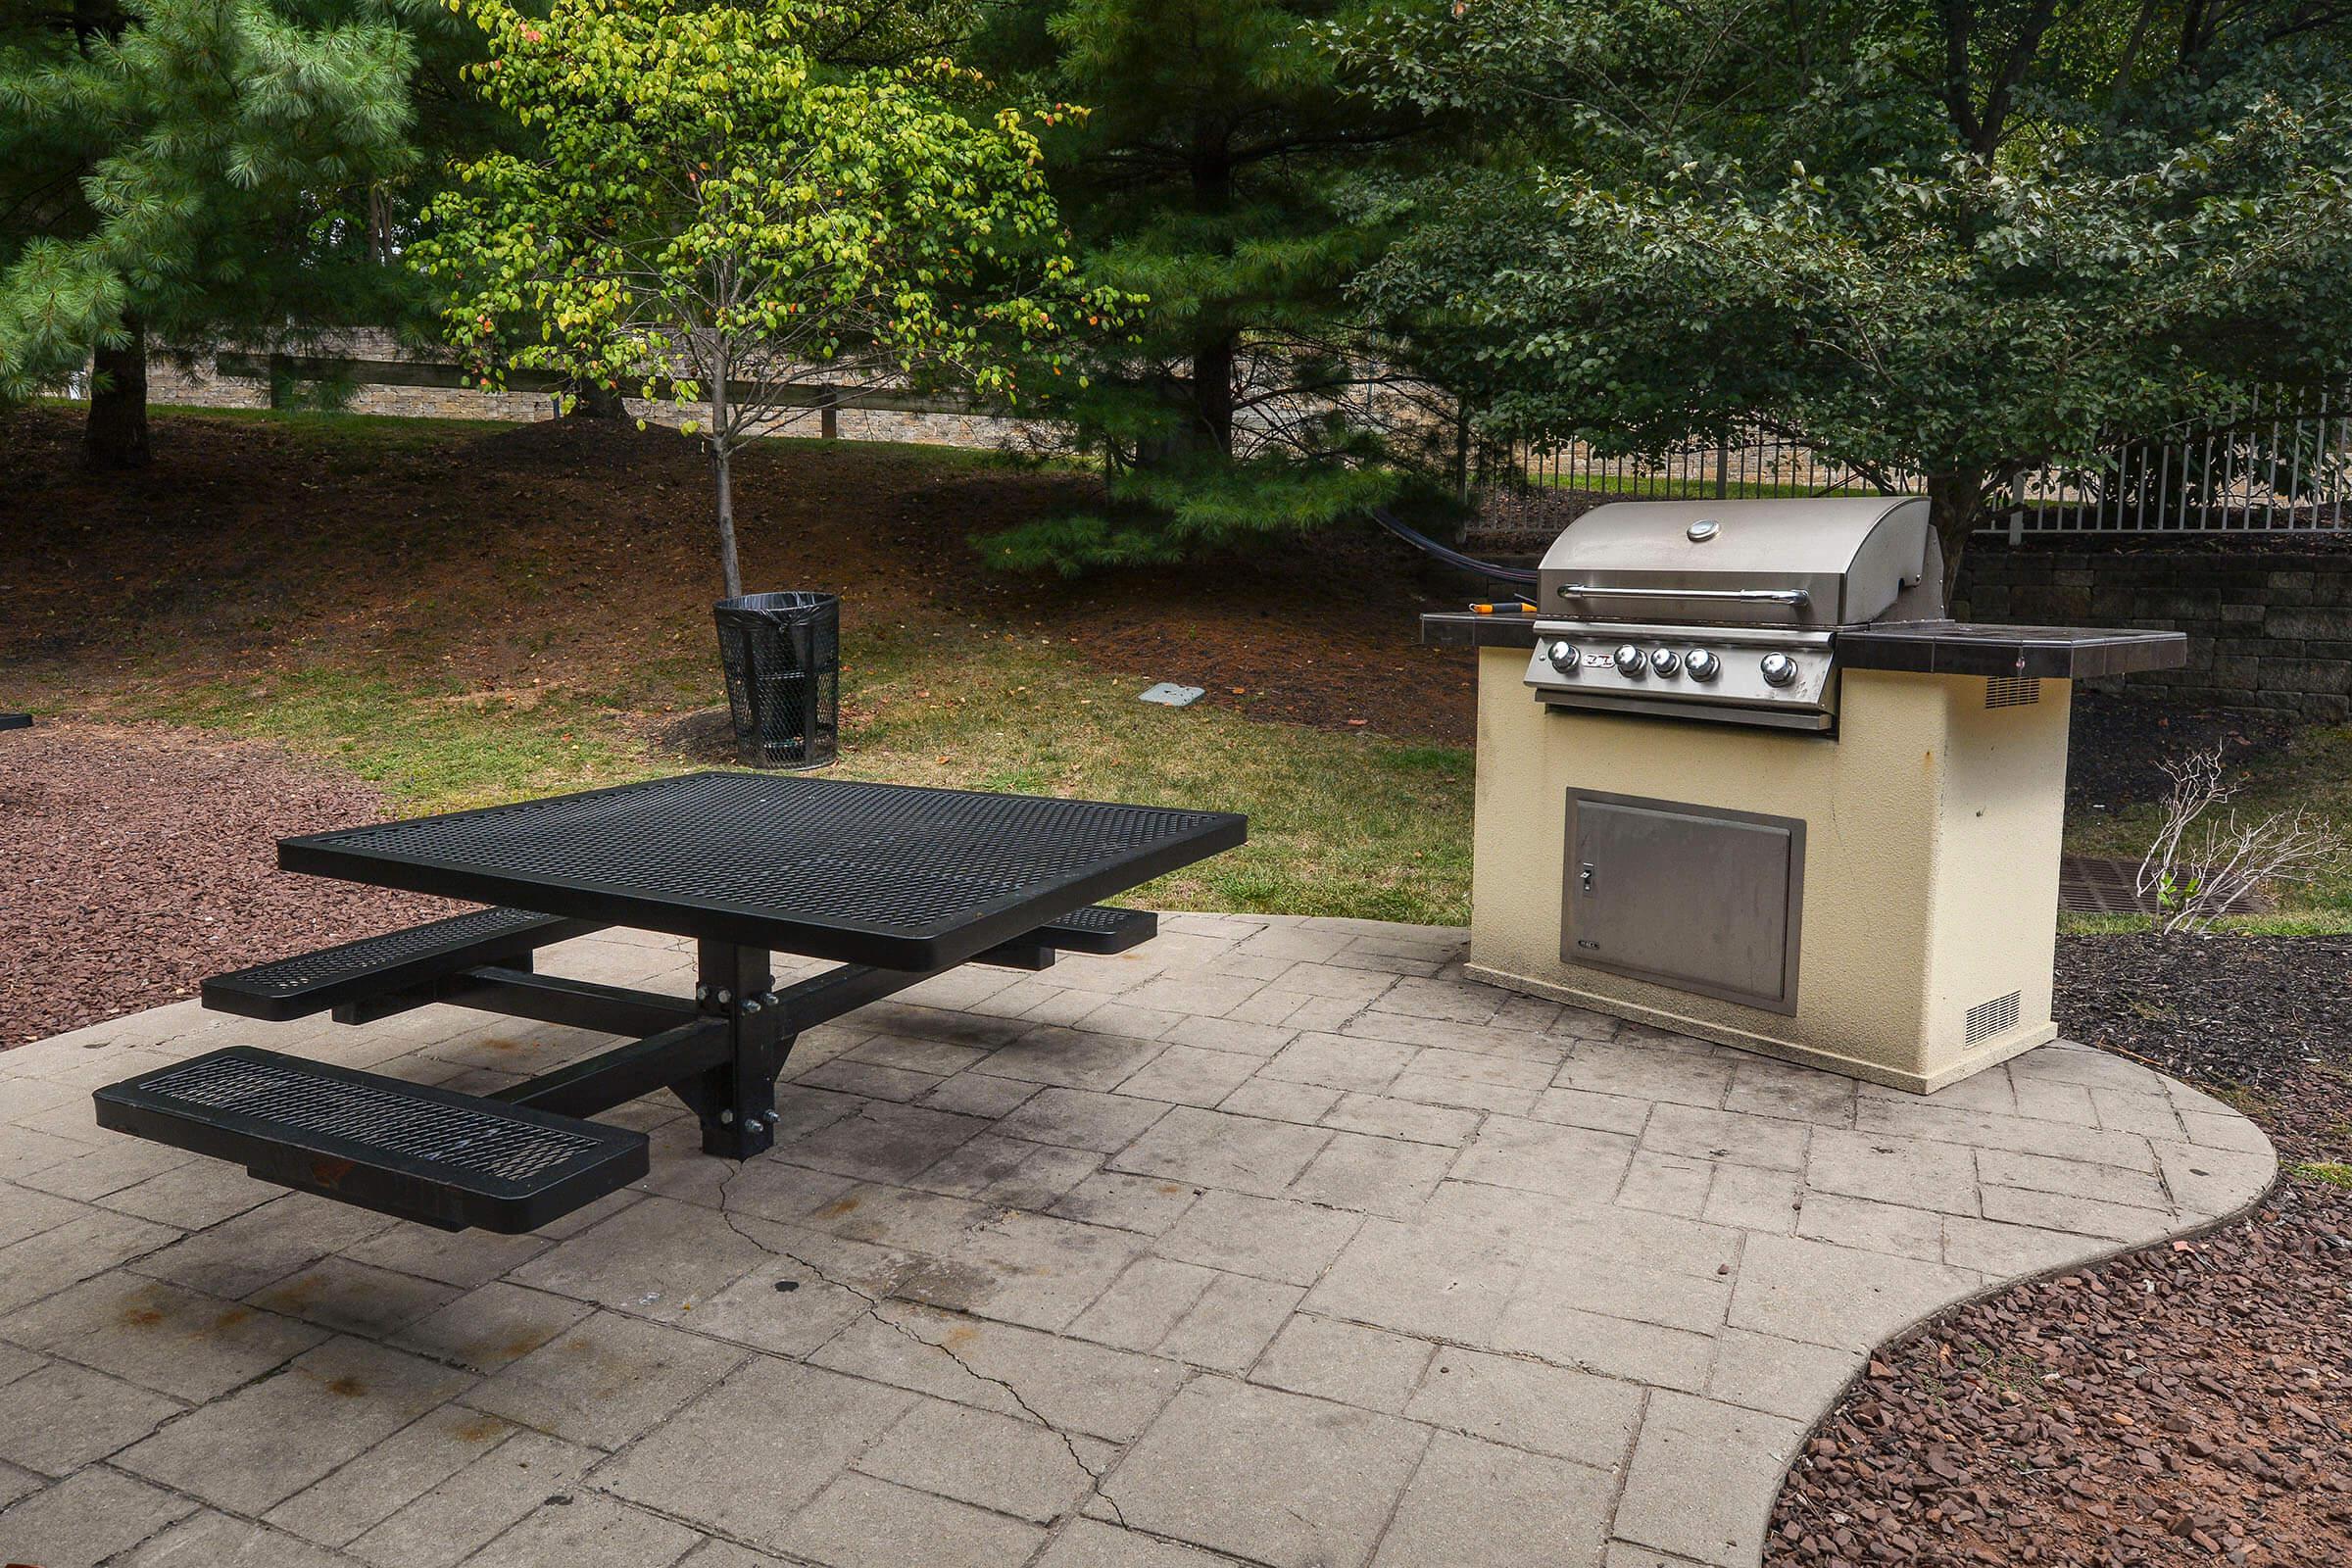 PICNIC AREA AND BARBECUE GRILLS